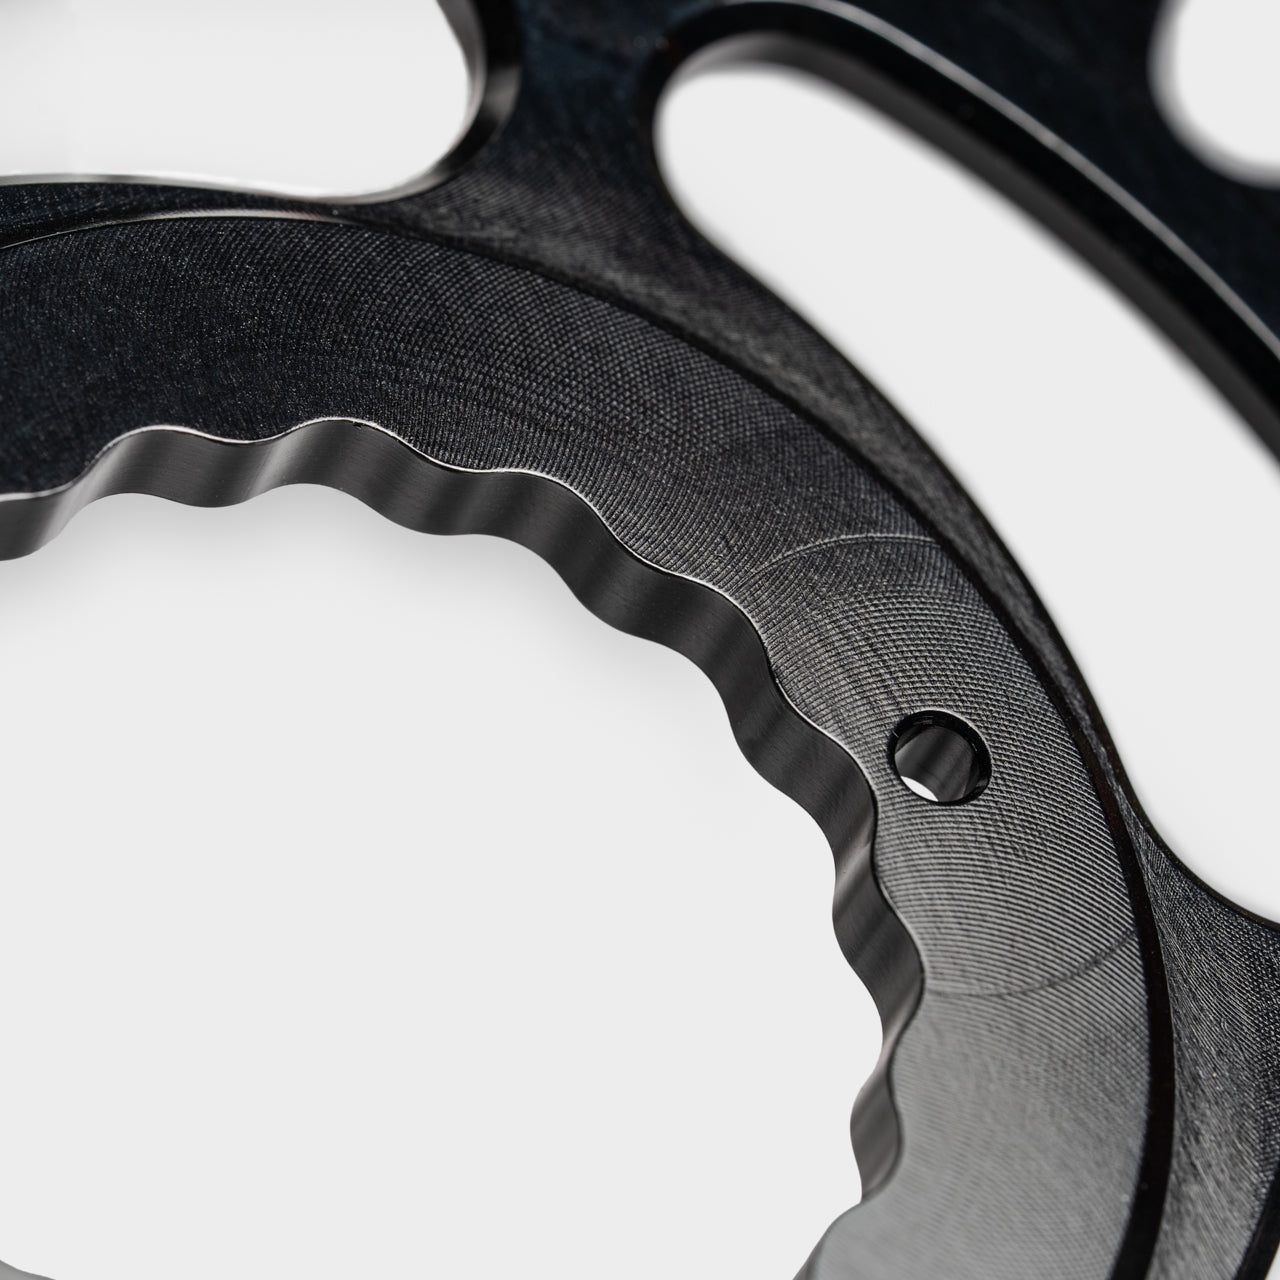 Race Face Cinch Boost direct mount chainring mount machining